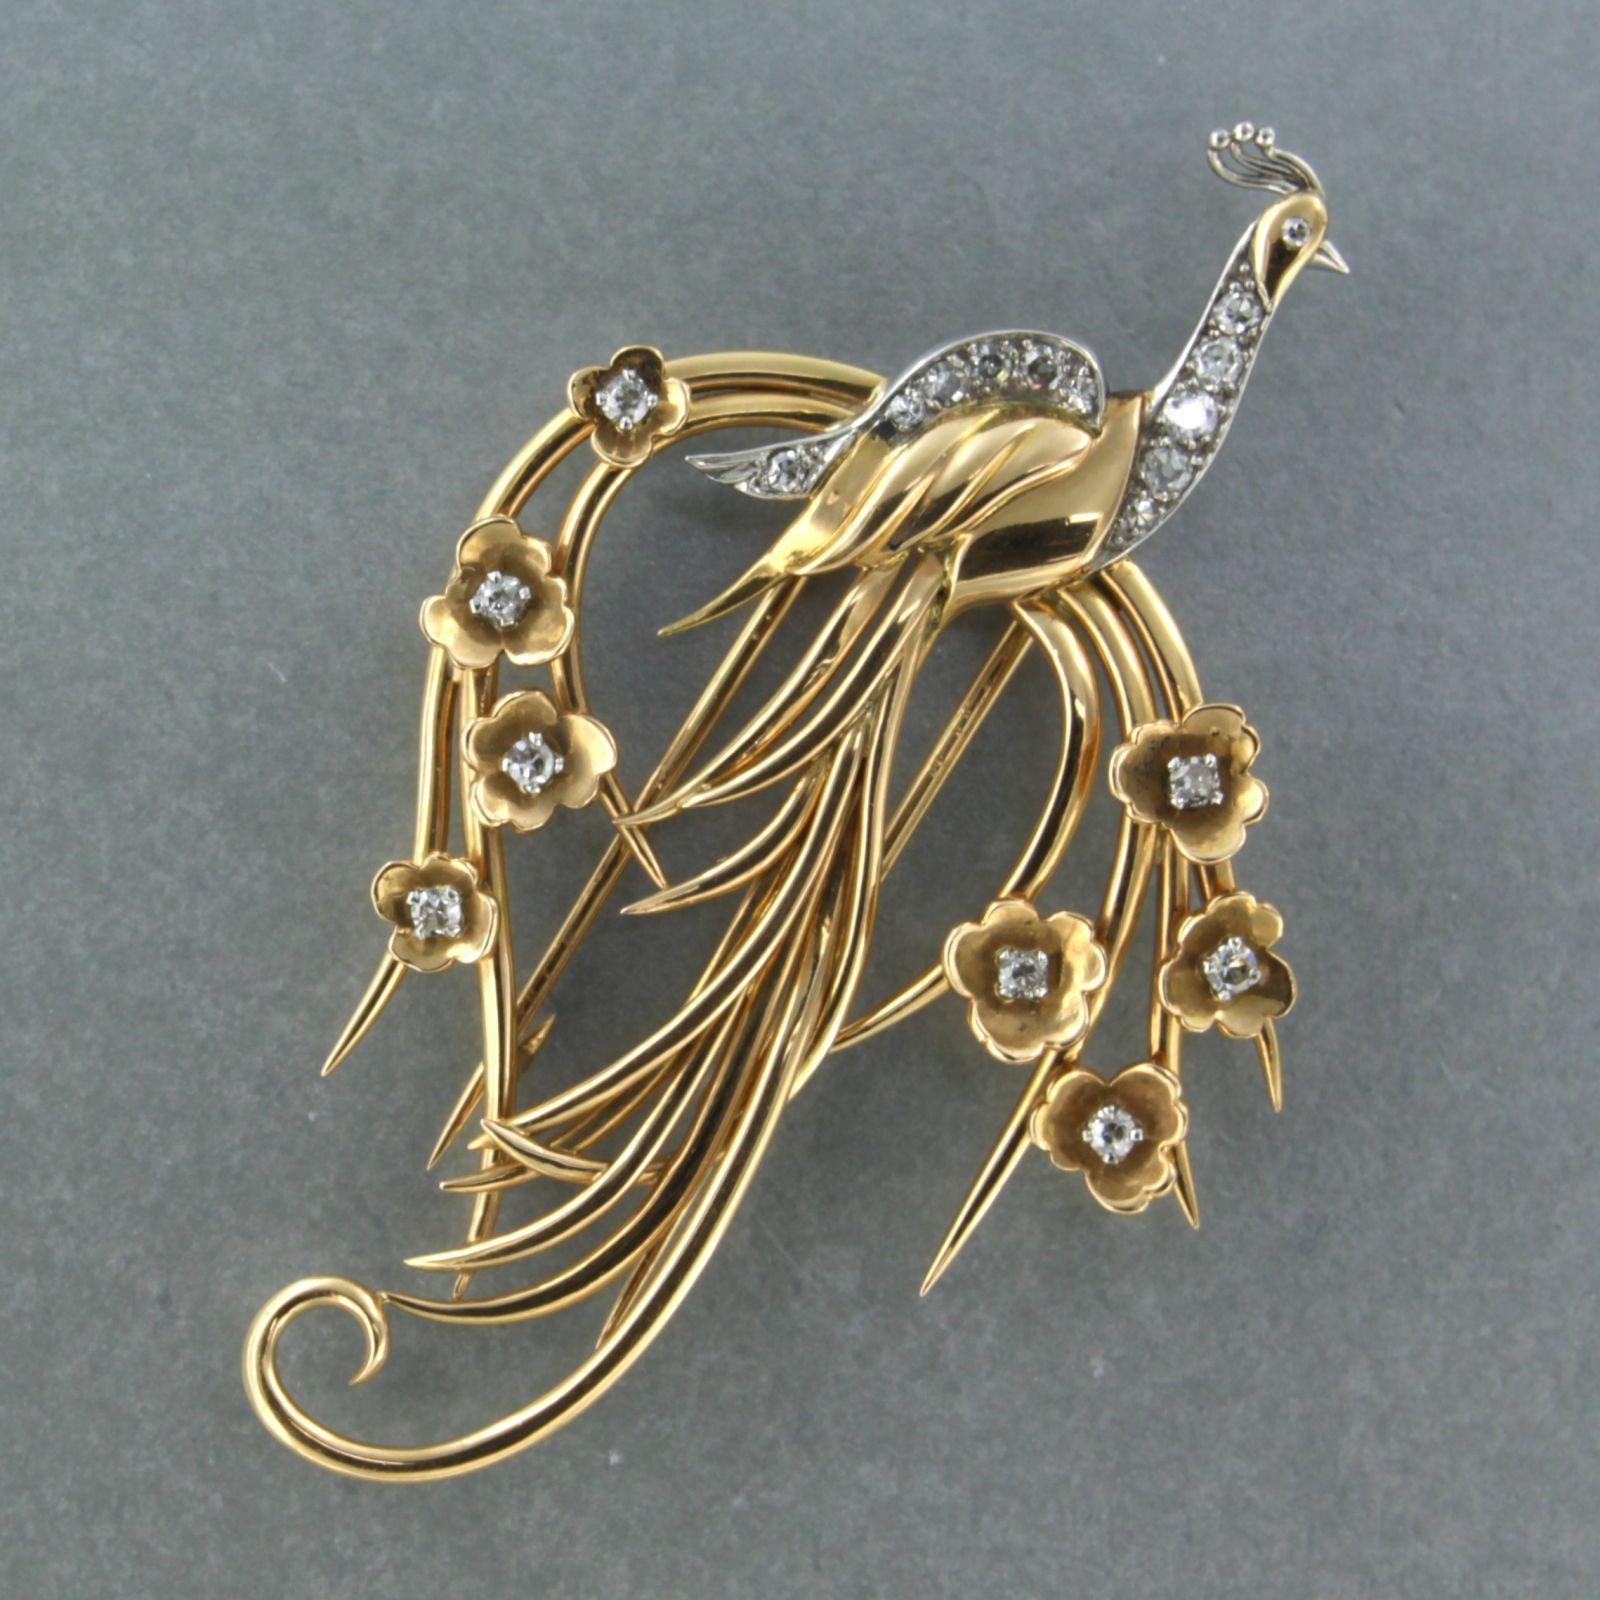 Retro Brooch in a shape of a peacock set with diamonds 18k bicolor gold For Sale